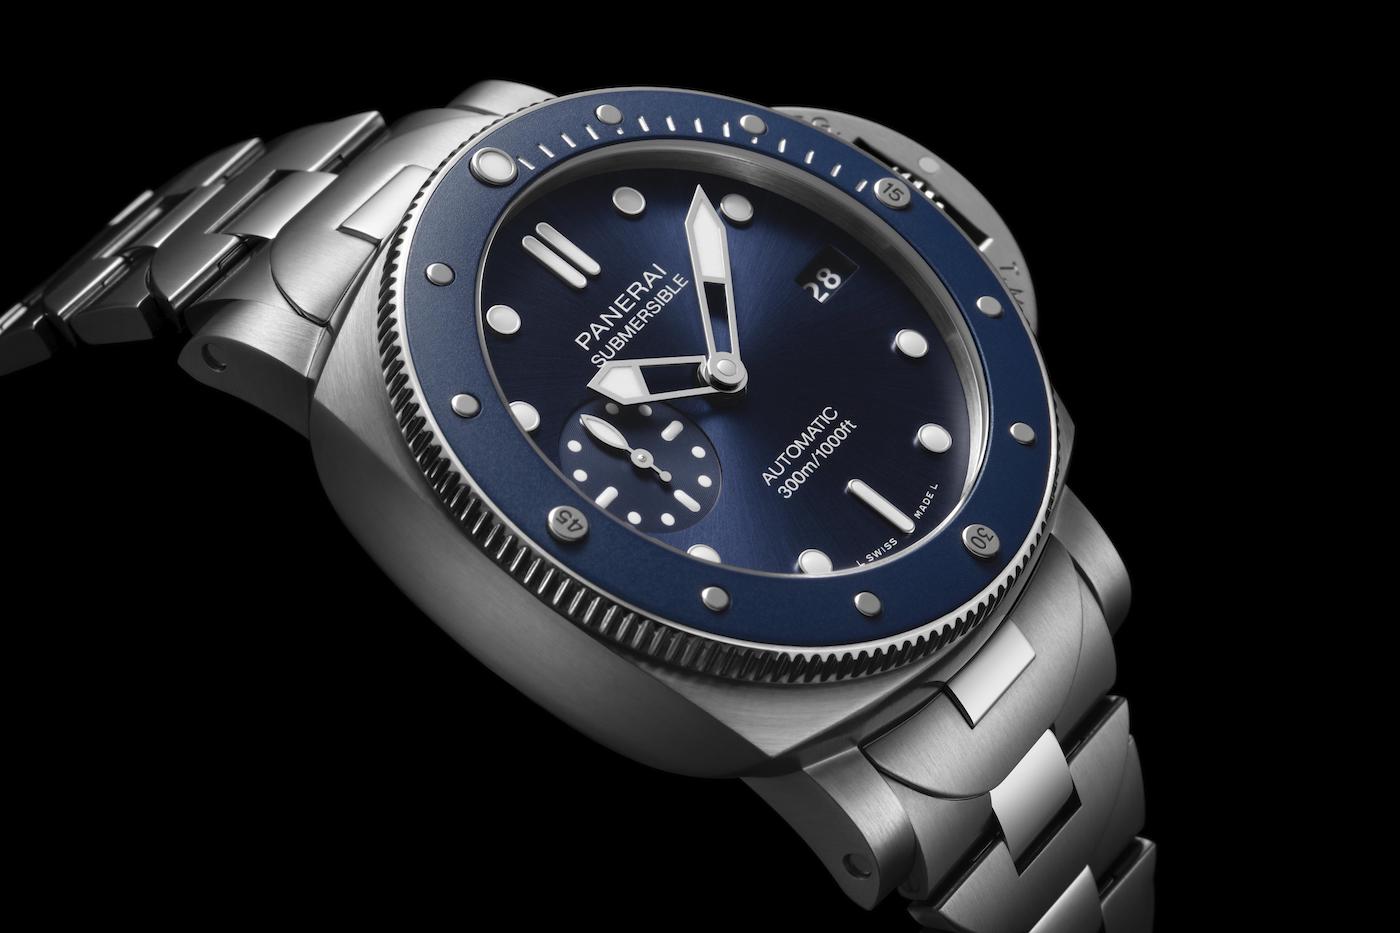 Panerai releases a new Submersible model with a metal bracelet